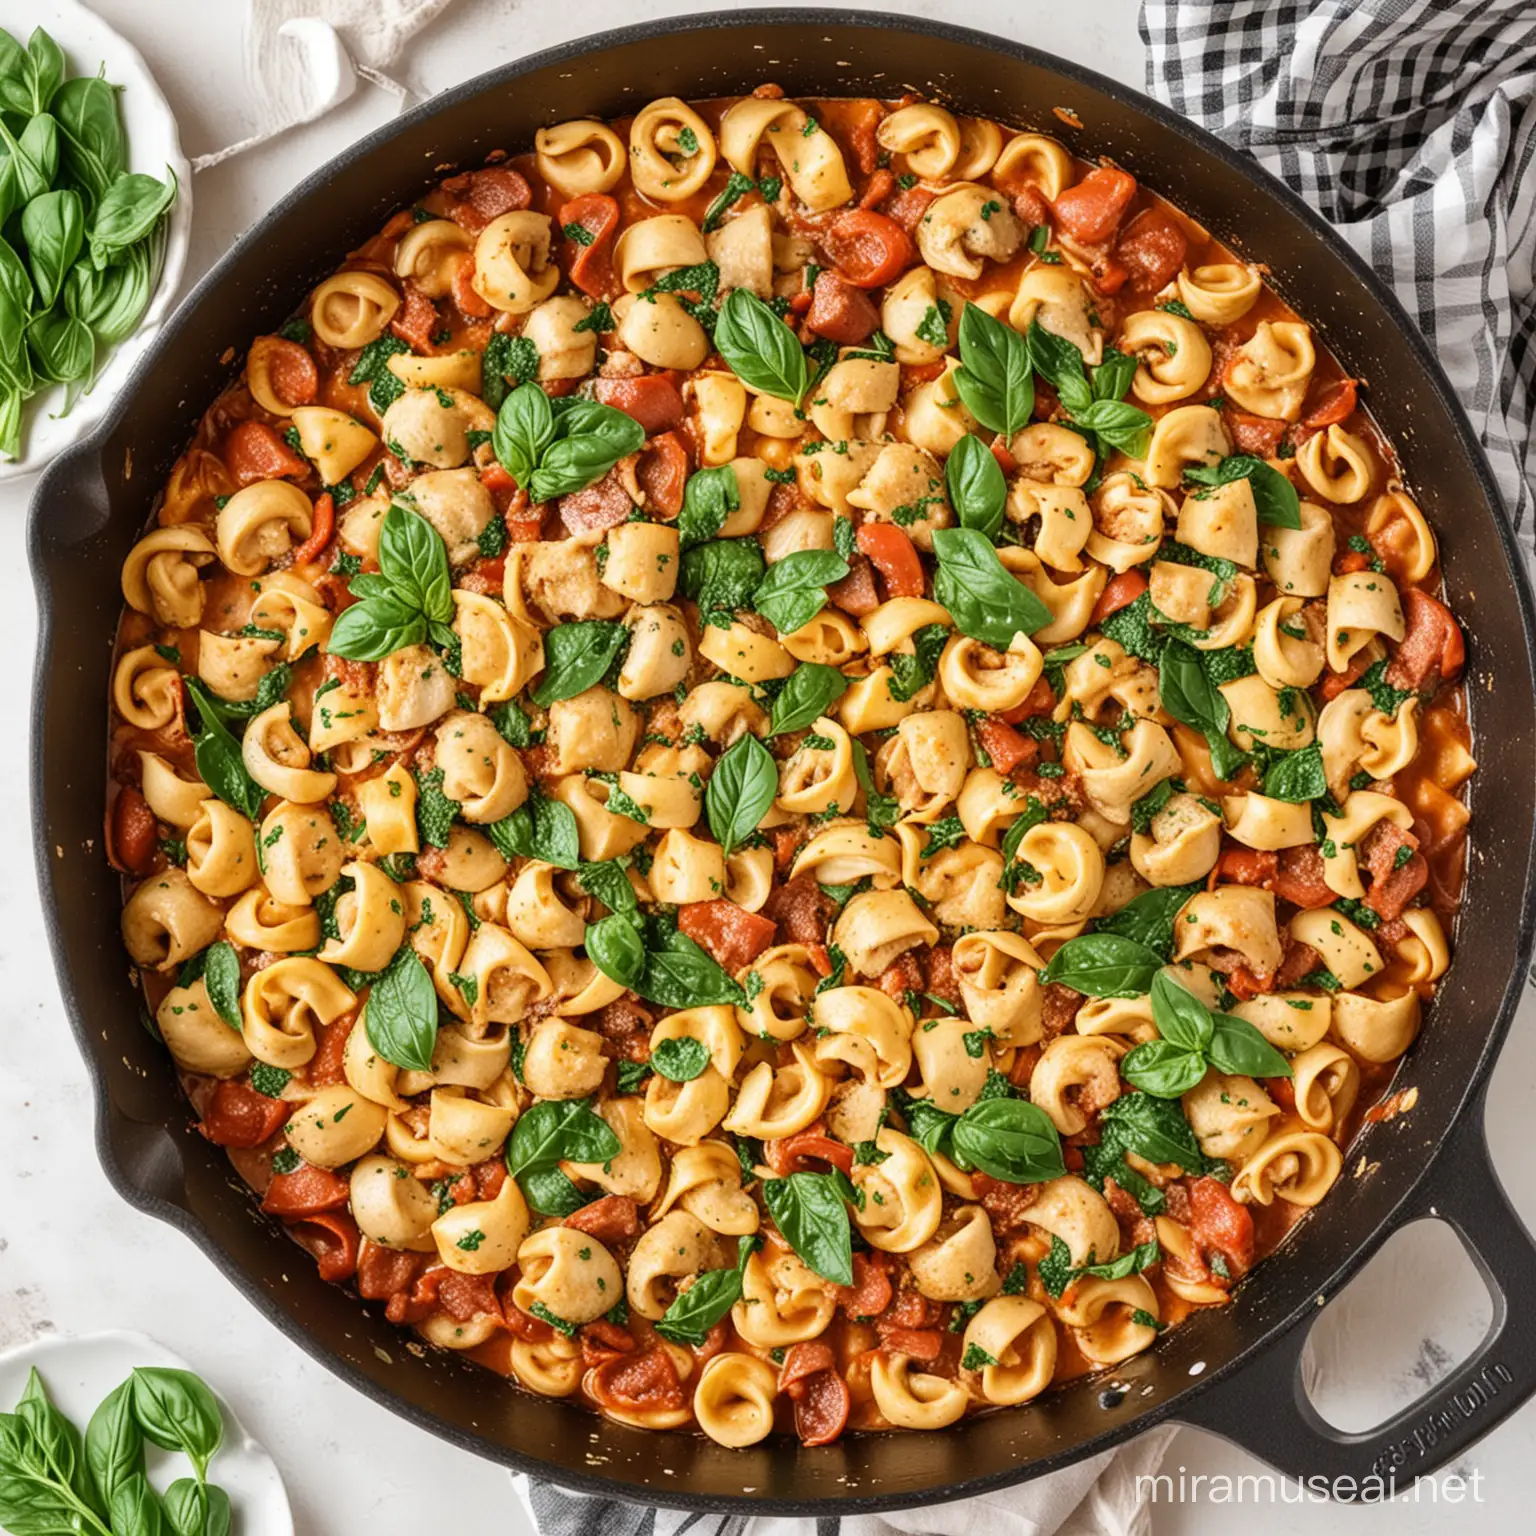 Savory Italian Chicken Tortellini Skillet: A Quick and Flavorful Meal
